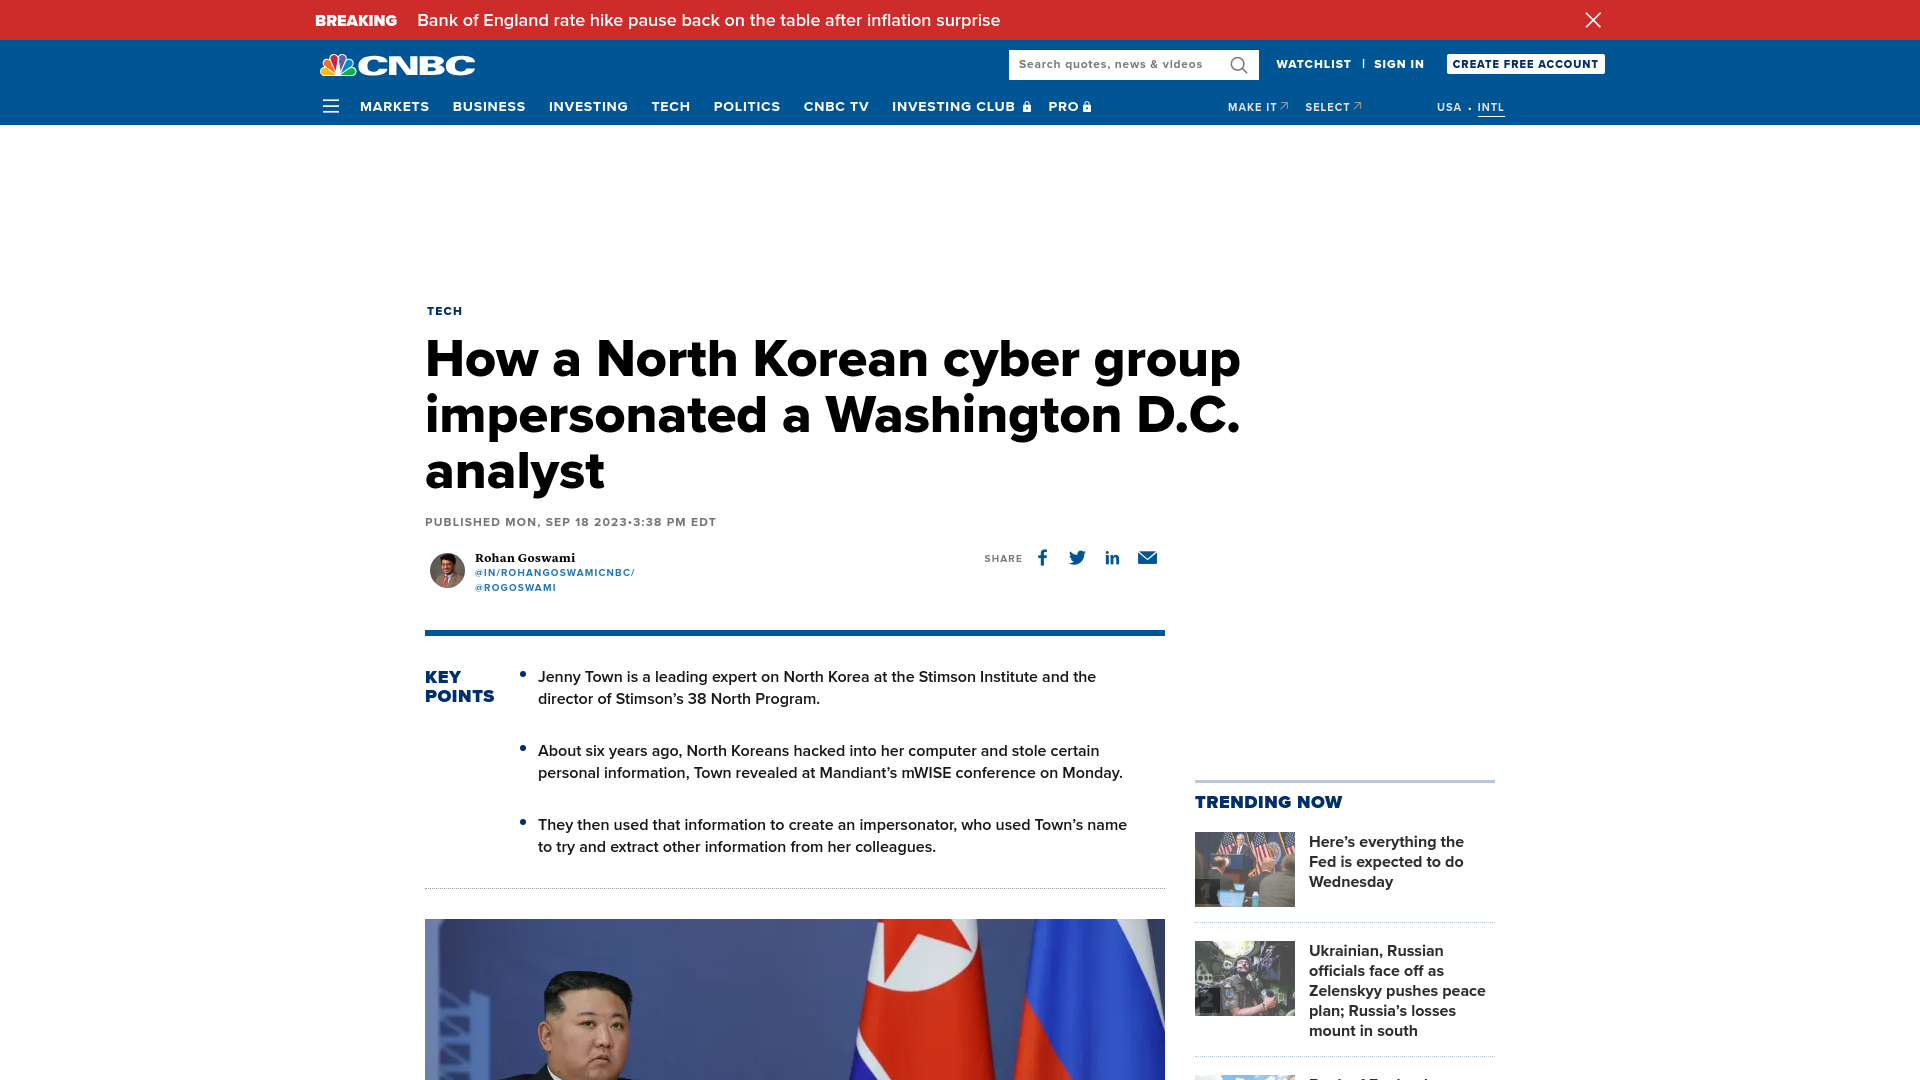 How a North Korean cyber group impersonated a Washington D.C. analyst